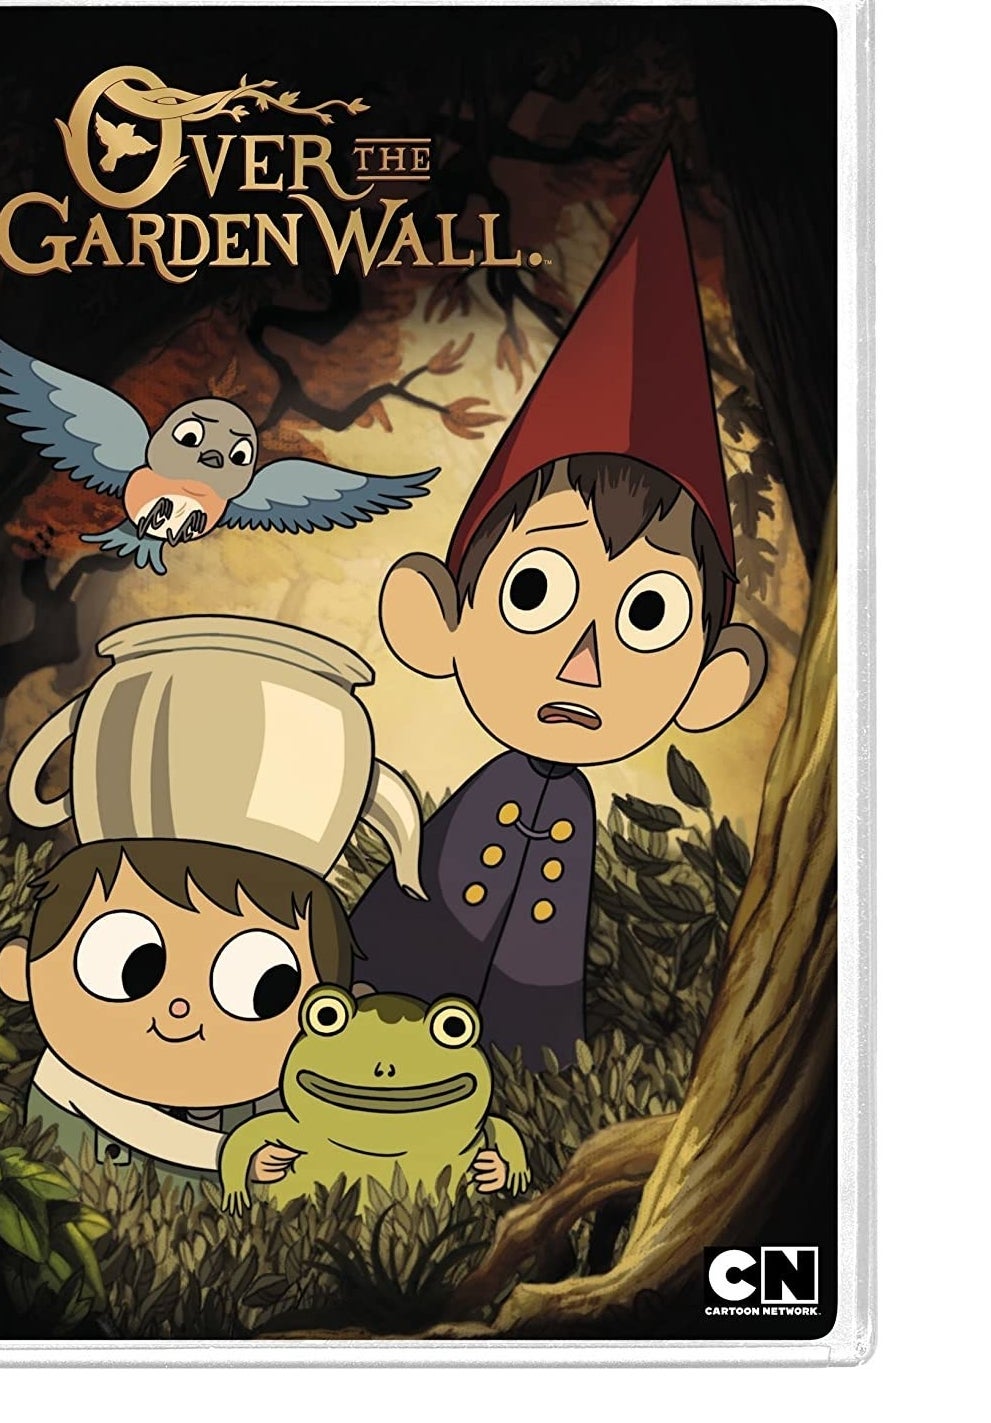 the cover for the dvd with two children, a frog, and a bird in a forest